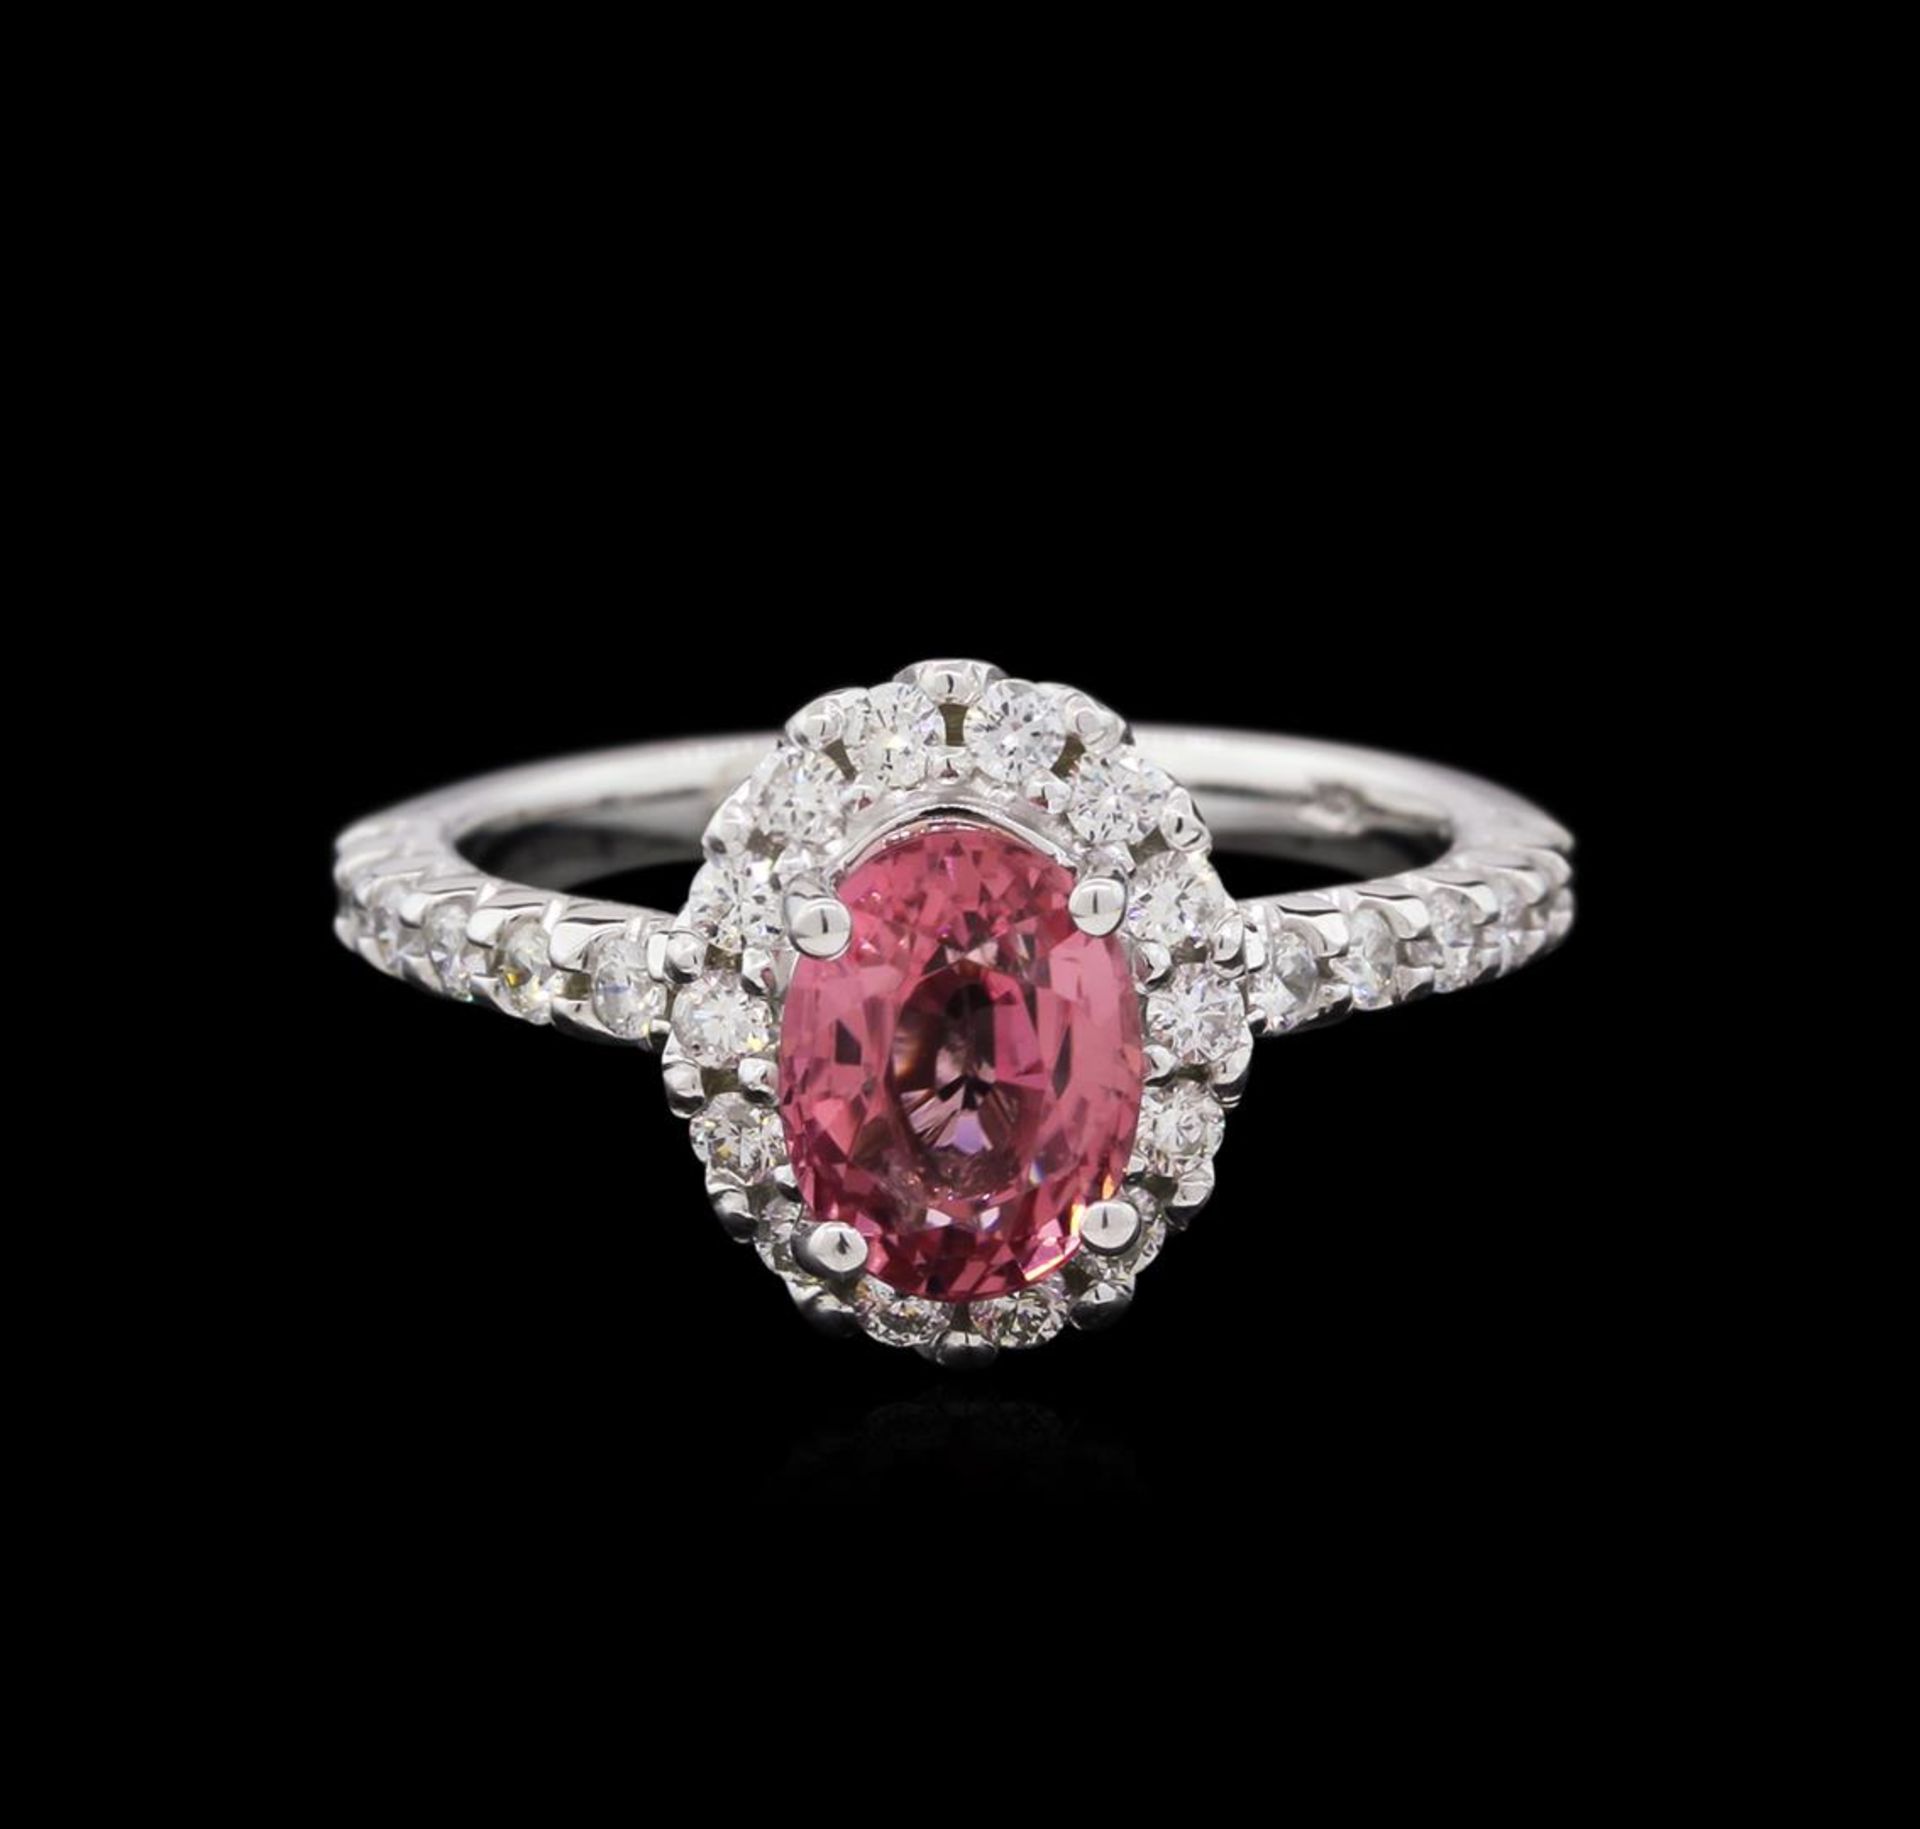 1.70 ctw Pink Tourmaline and Diamond Ring - 14KT White Gold - Image 2 of 2